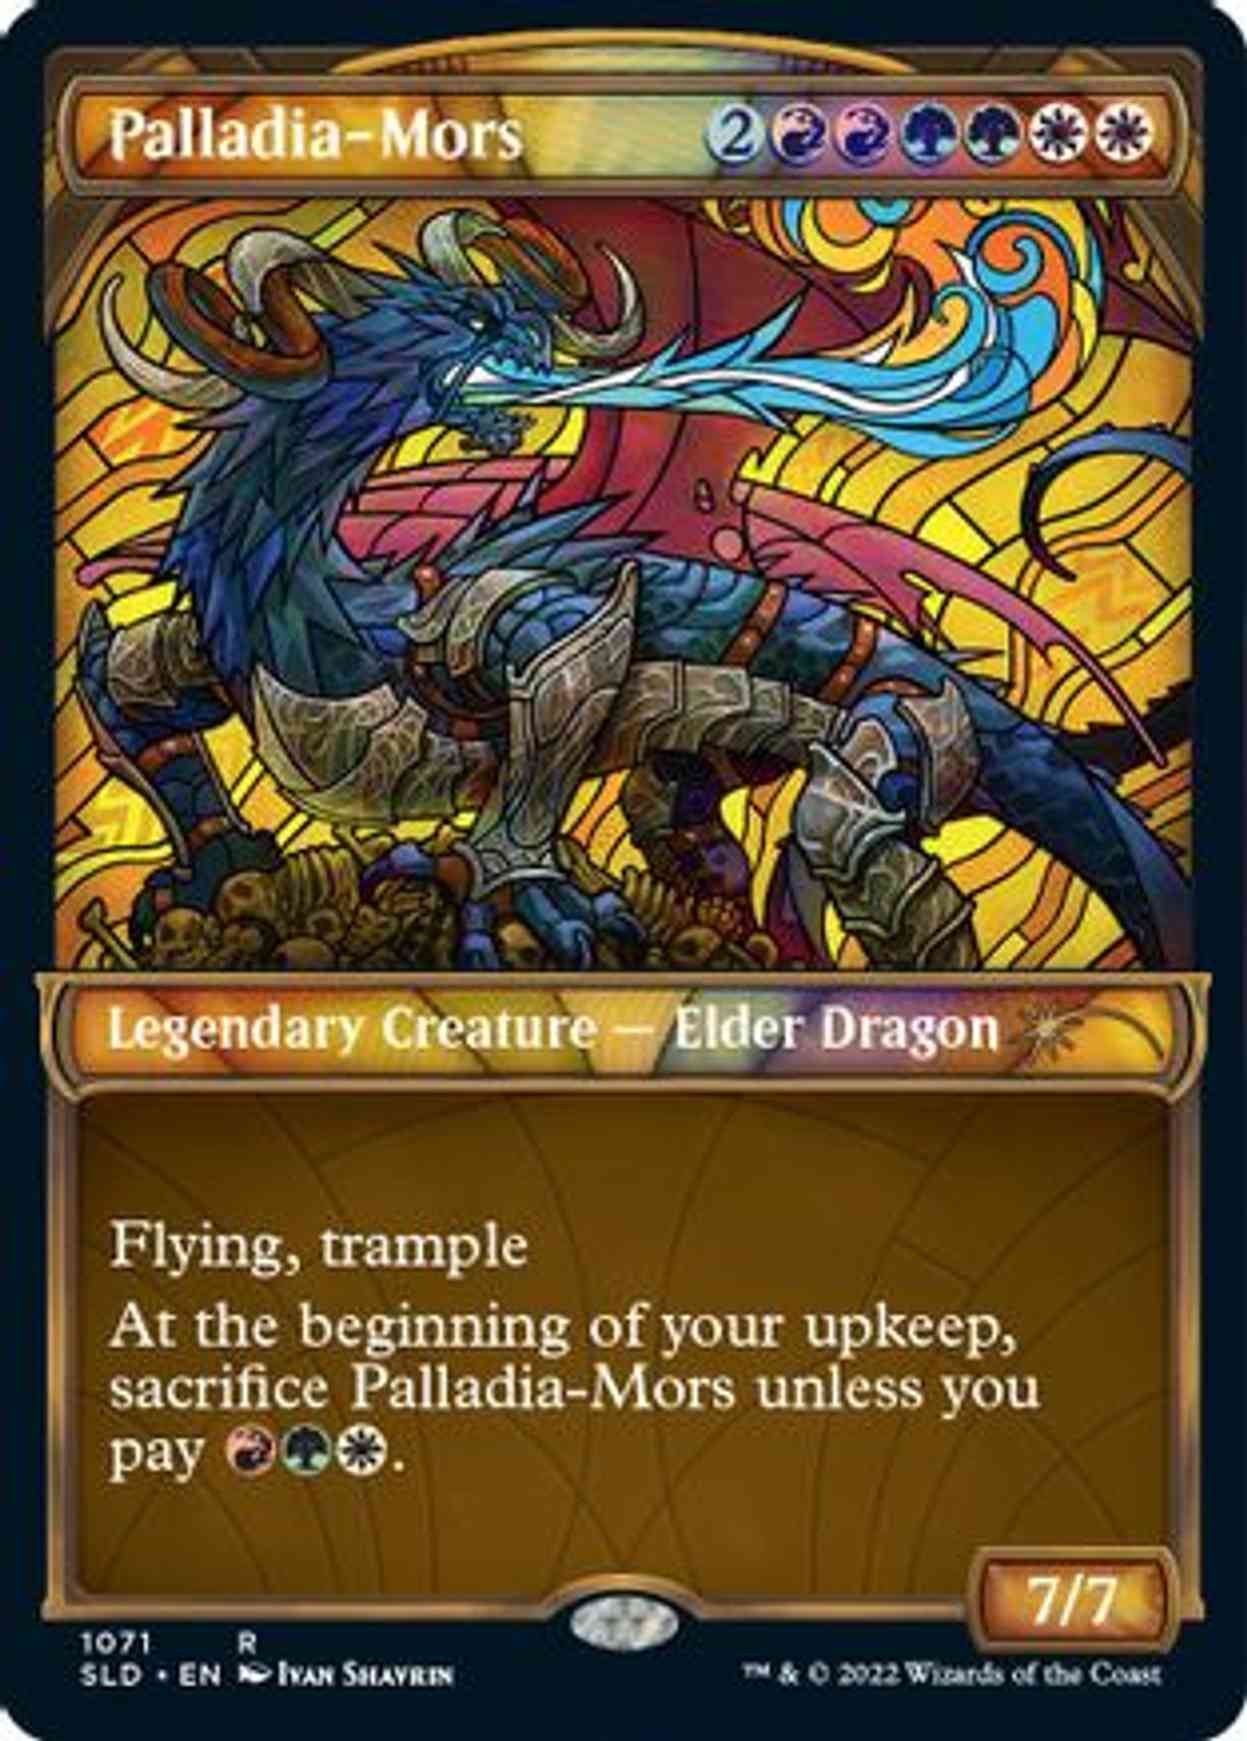 Palladia-Mors (Stained Glass) magic card front